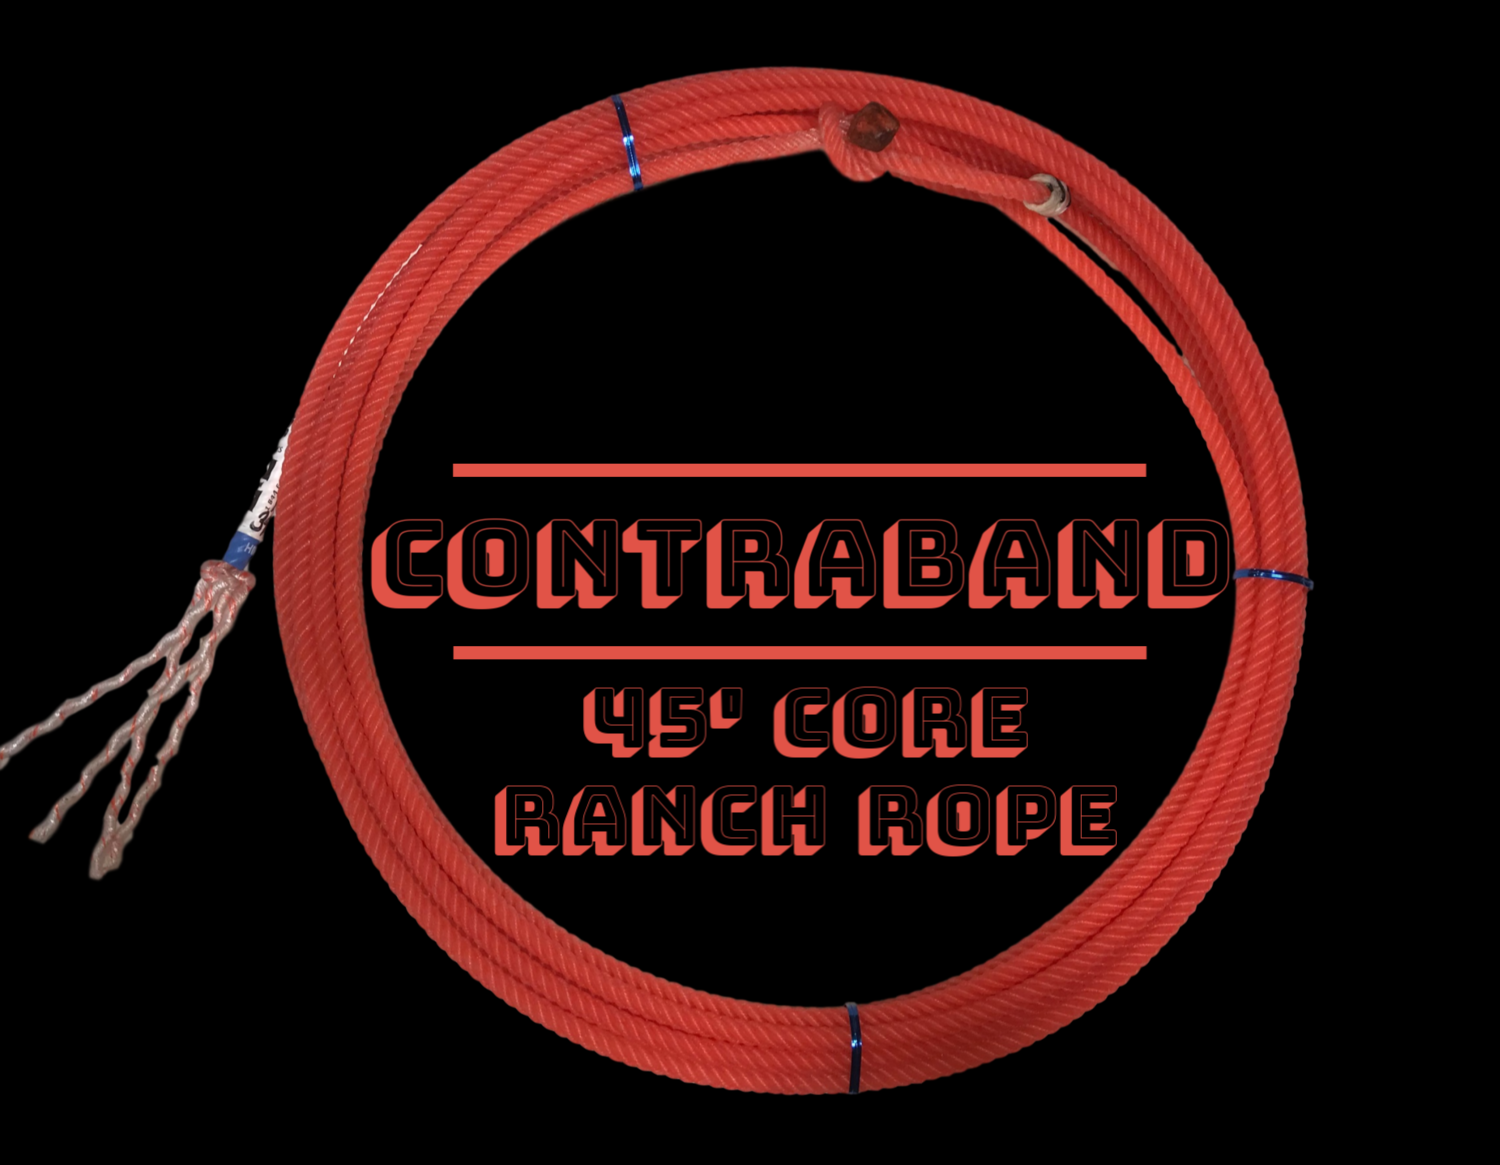 Contraband- 45’ Core Ranch Rope